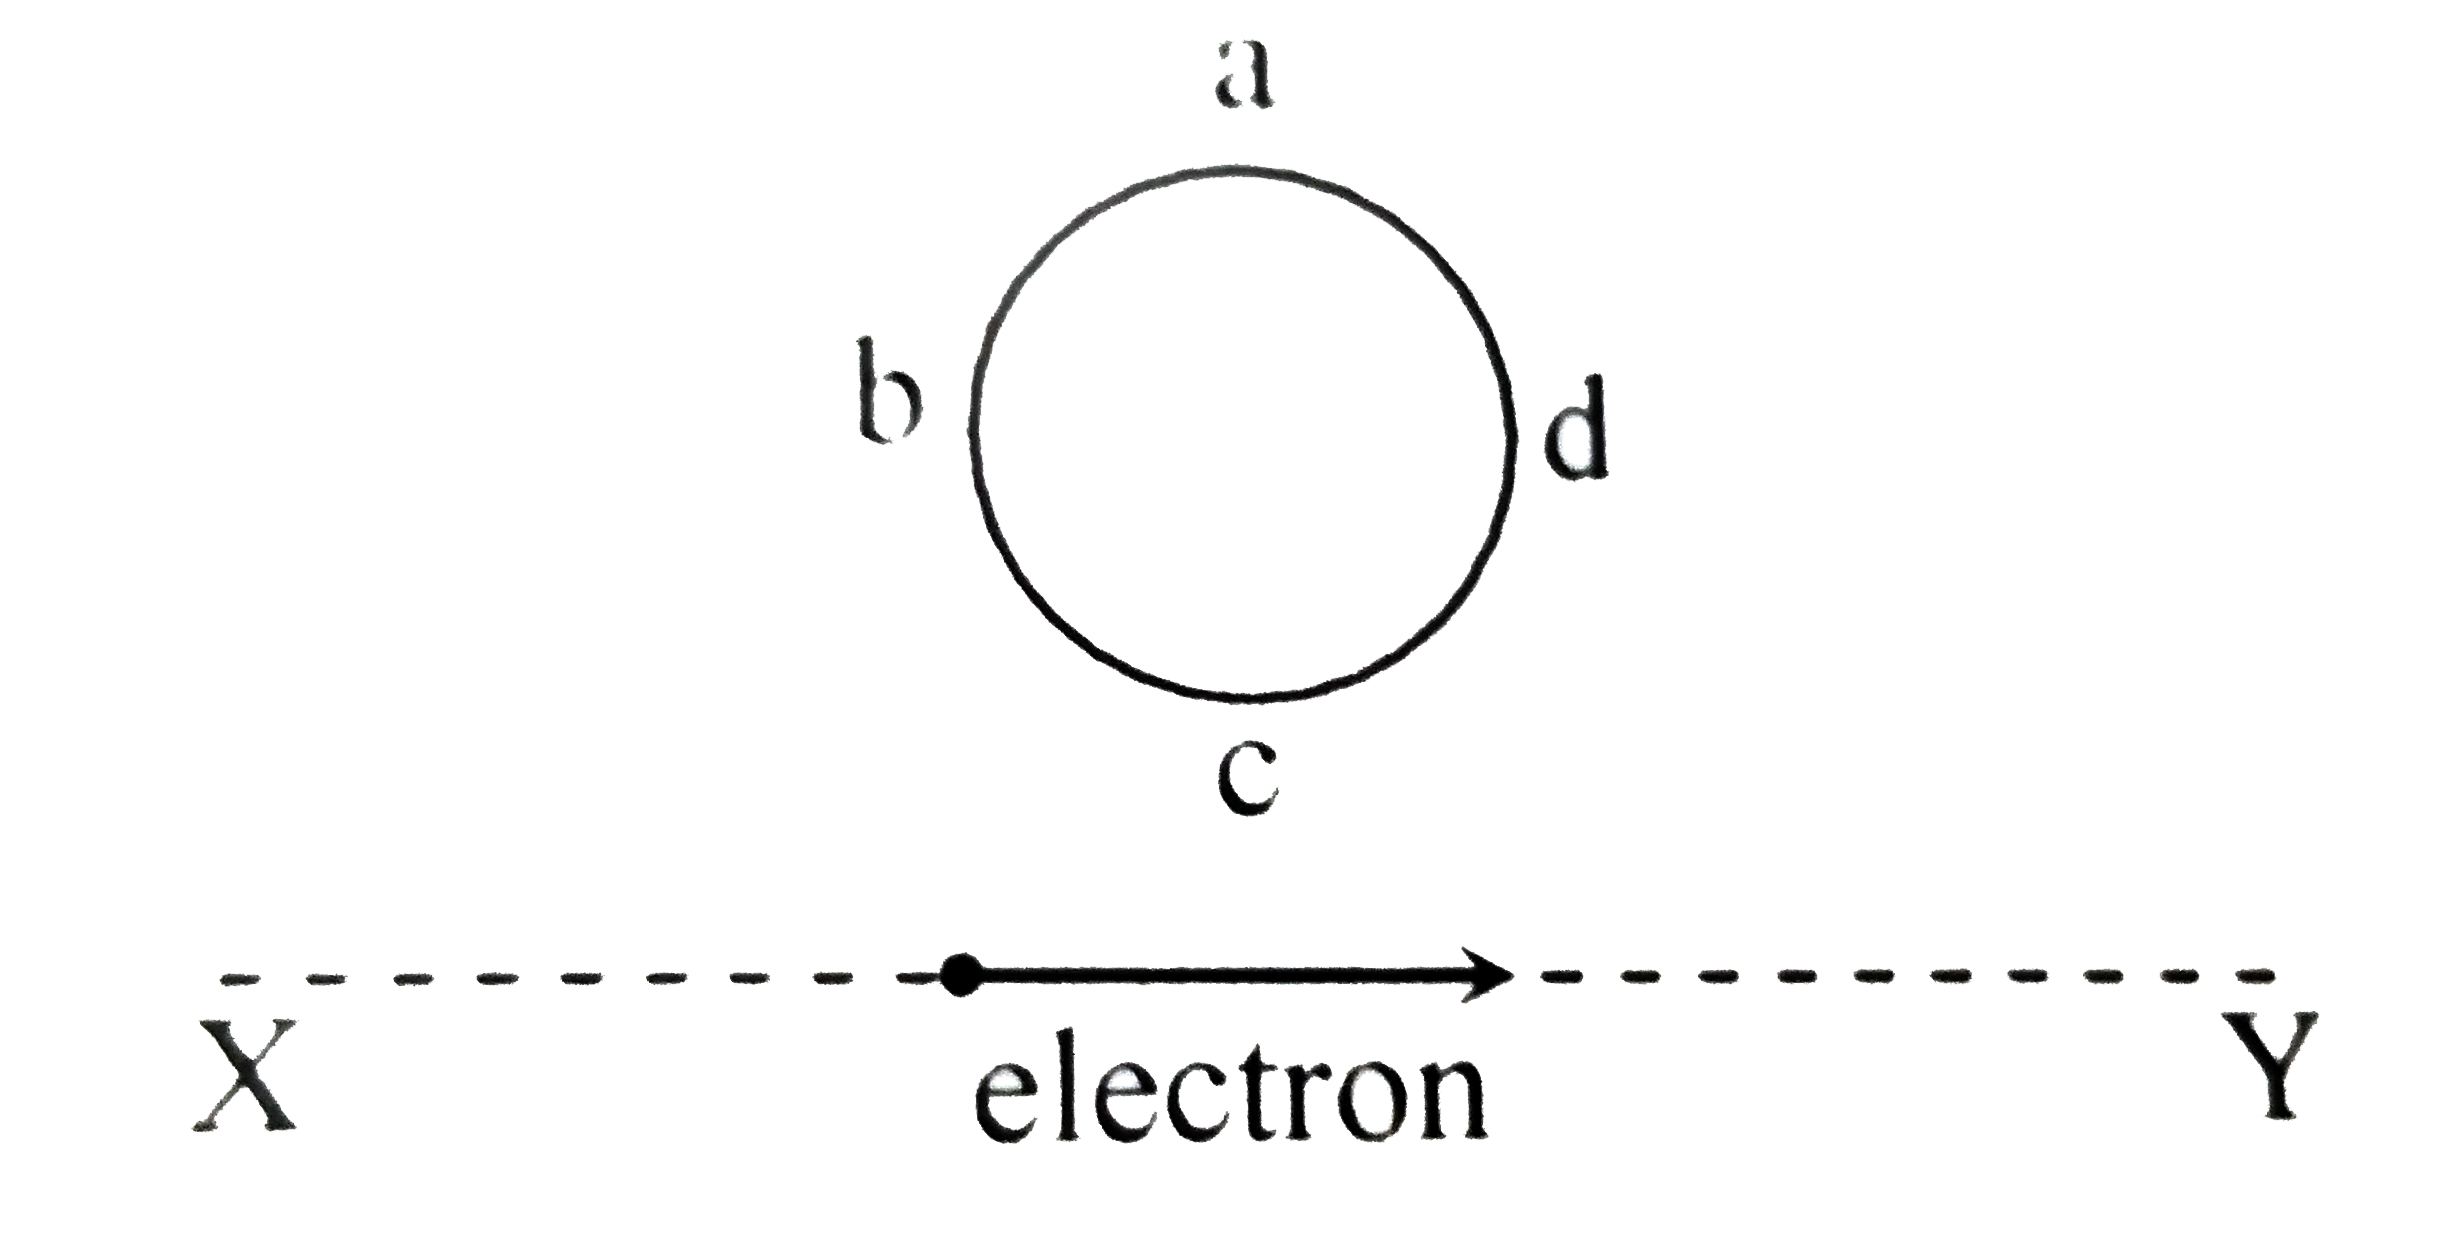 An electron moves on a straight line path XY as shown. The abcd is a coild adjacent to the path of electron. What will be the direction of current, if any, included in the coil?